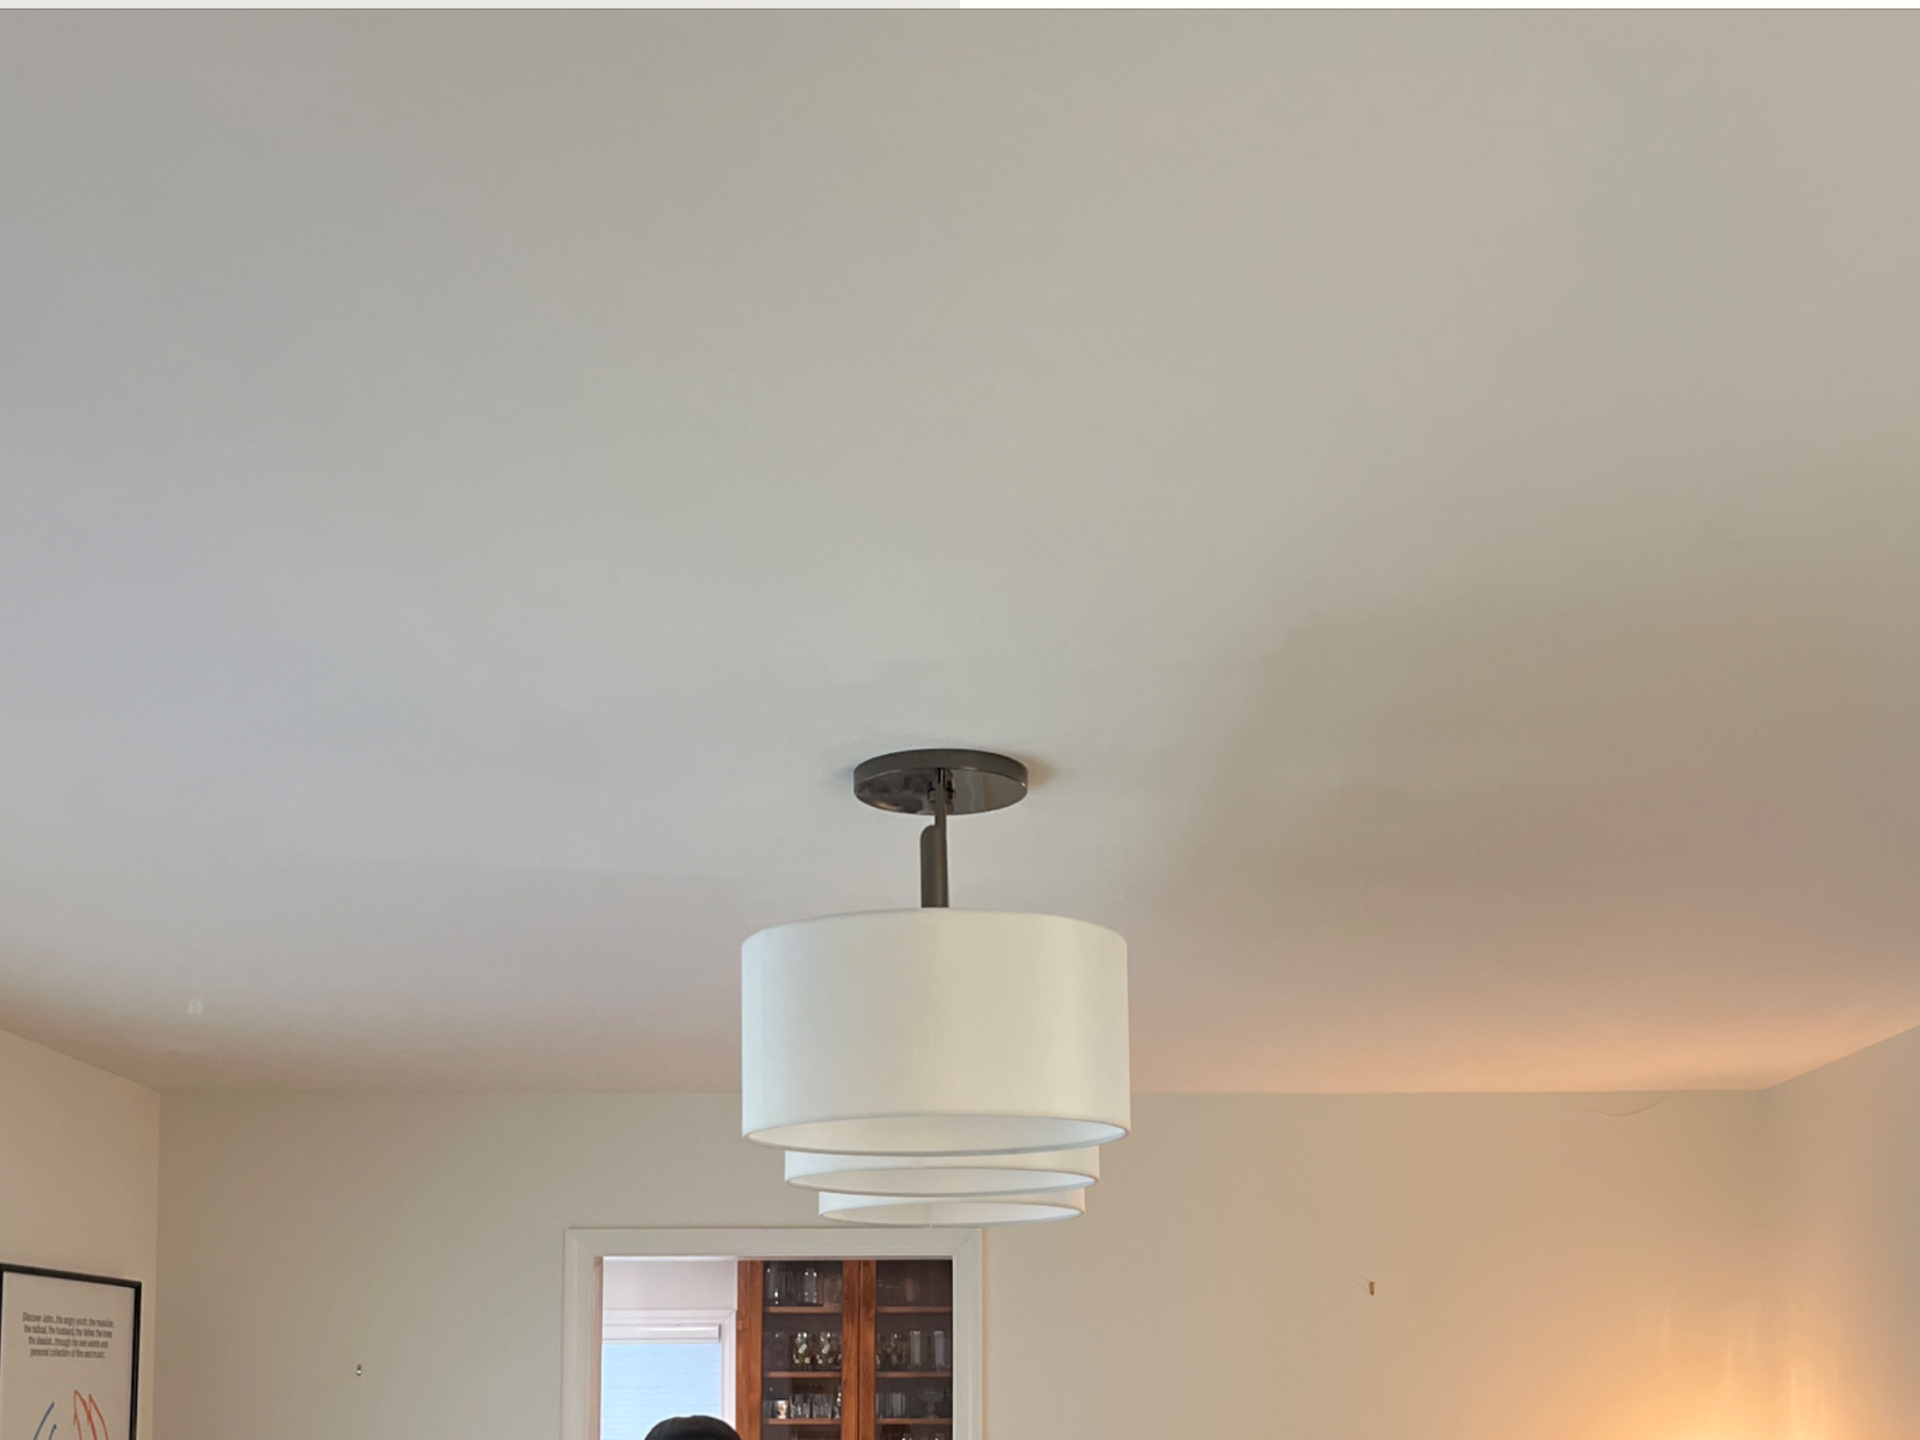 Ceiling light fixture newly installed in a modern living room